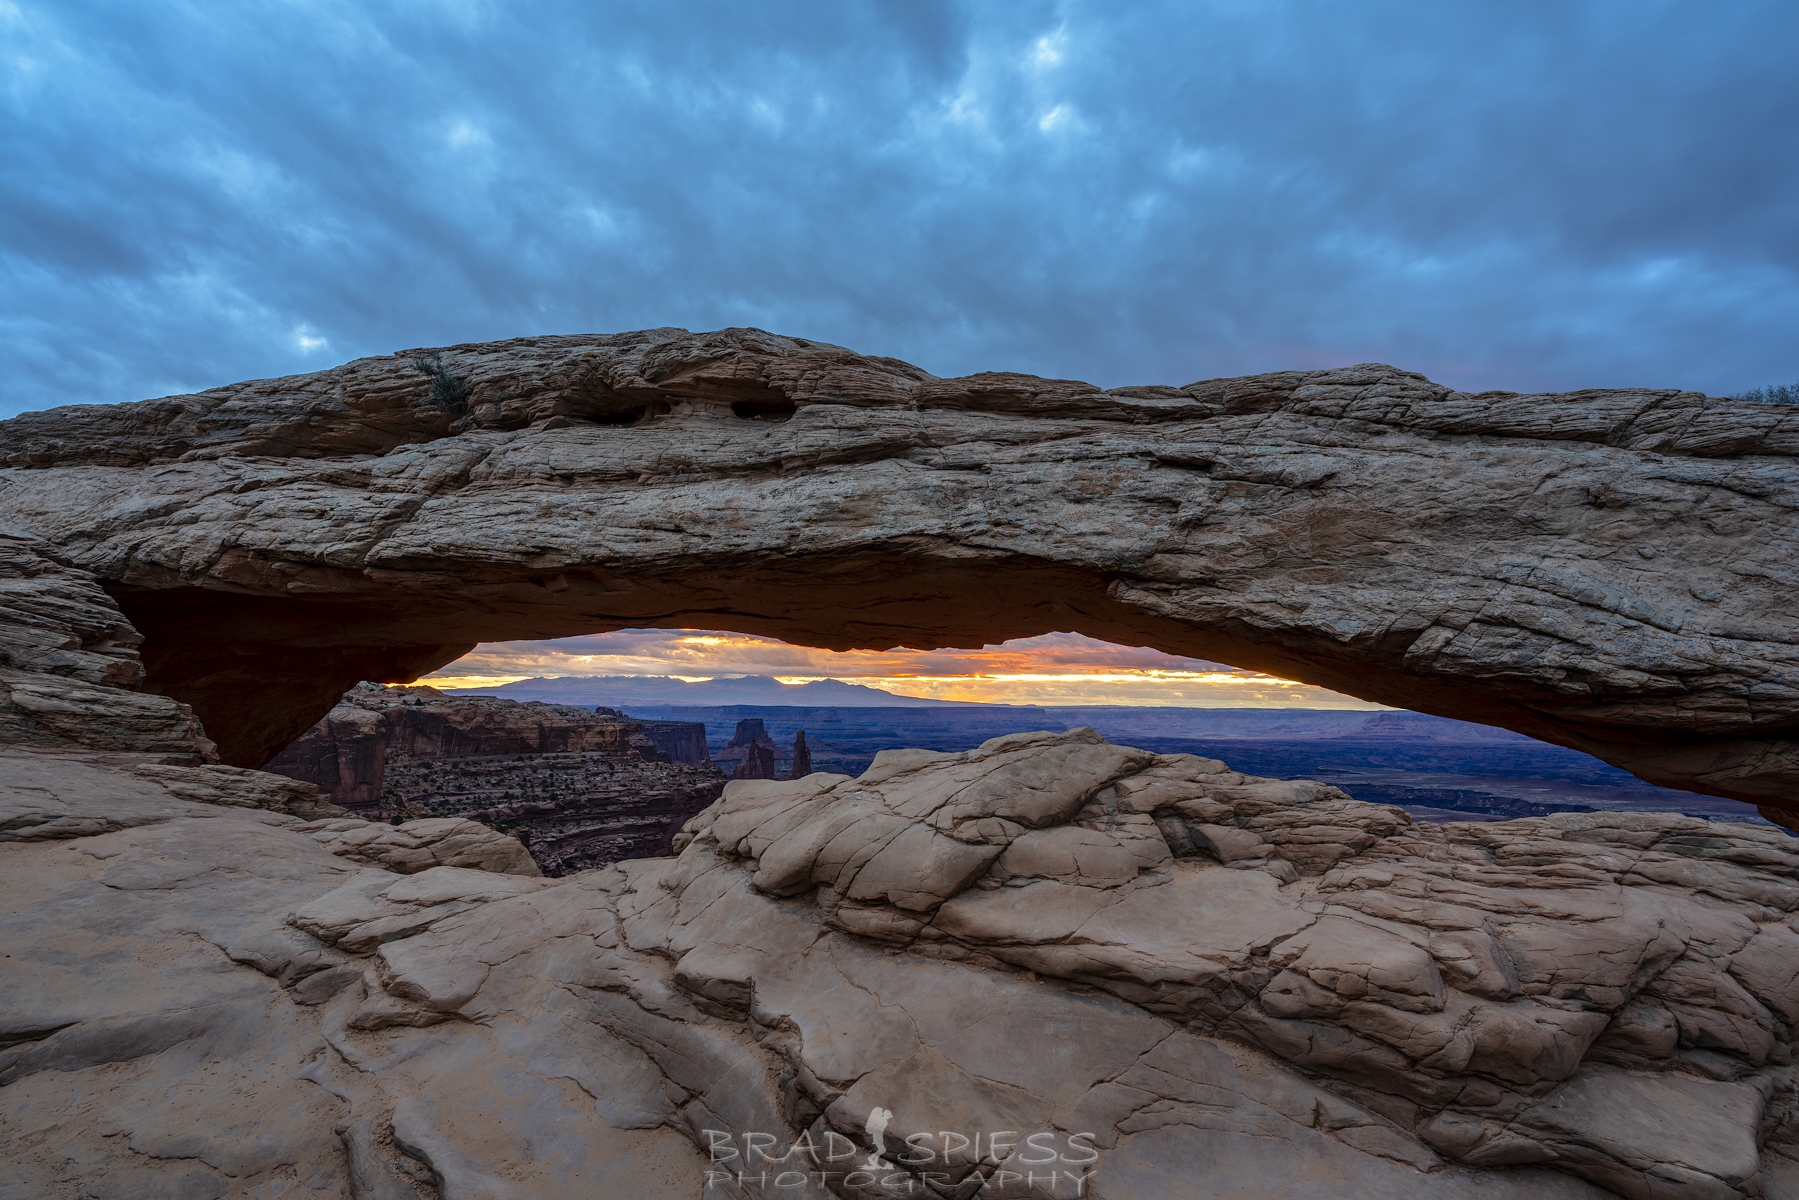 The sun lighting up the clouds in the distance seen through Mesa Arch